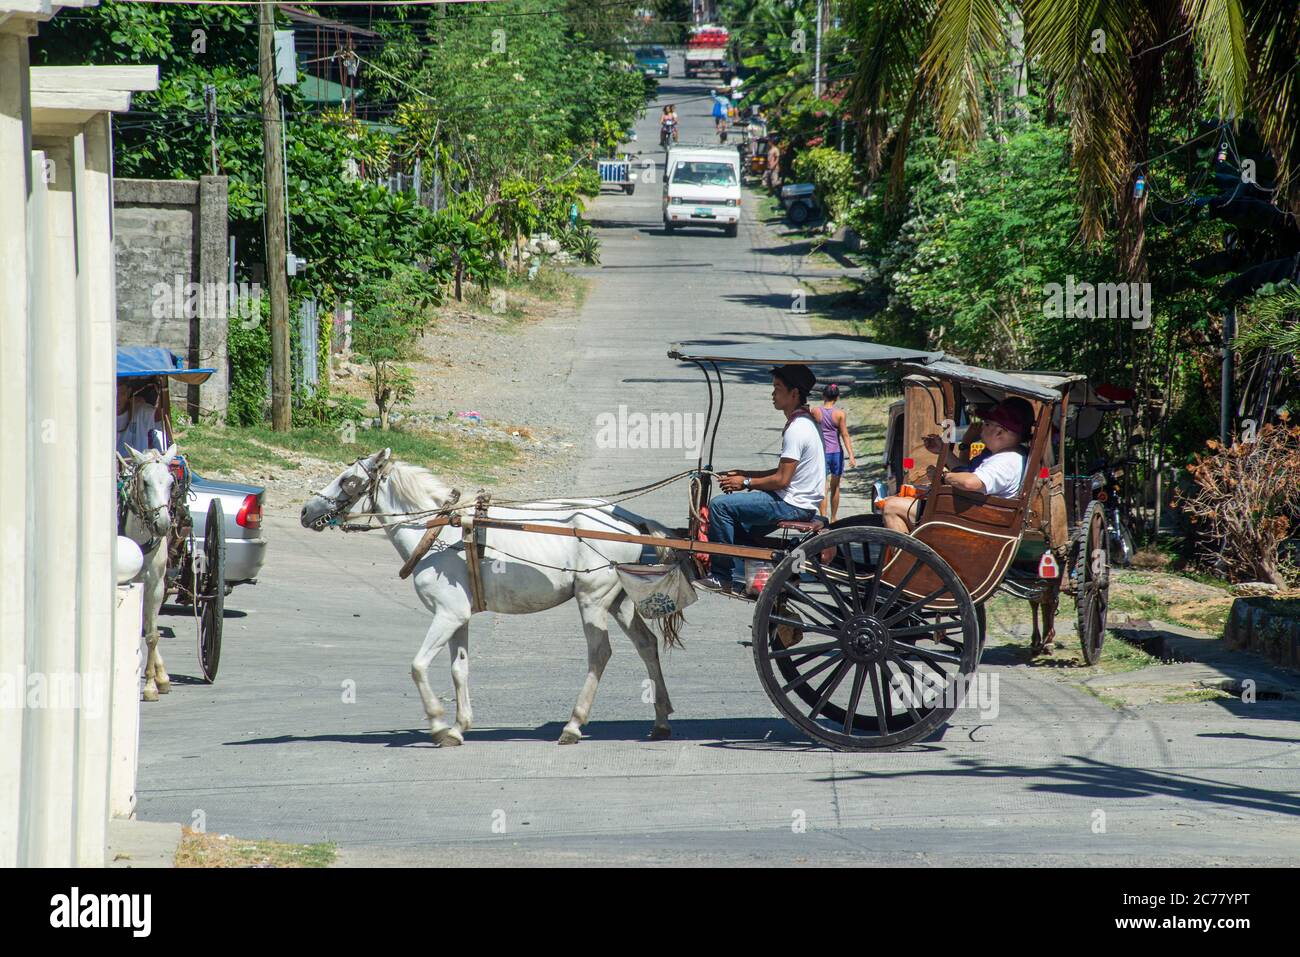 A horse and trap, known as a Kalesa, in use by tourists, Vigan, Philippines Stock Photo